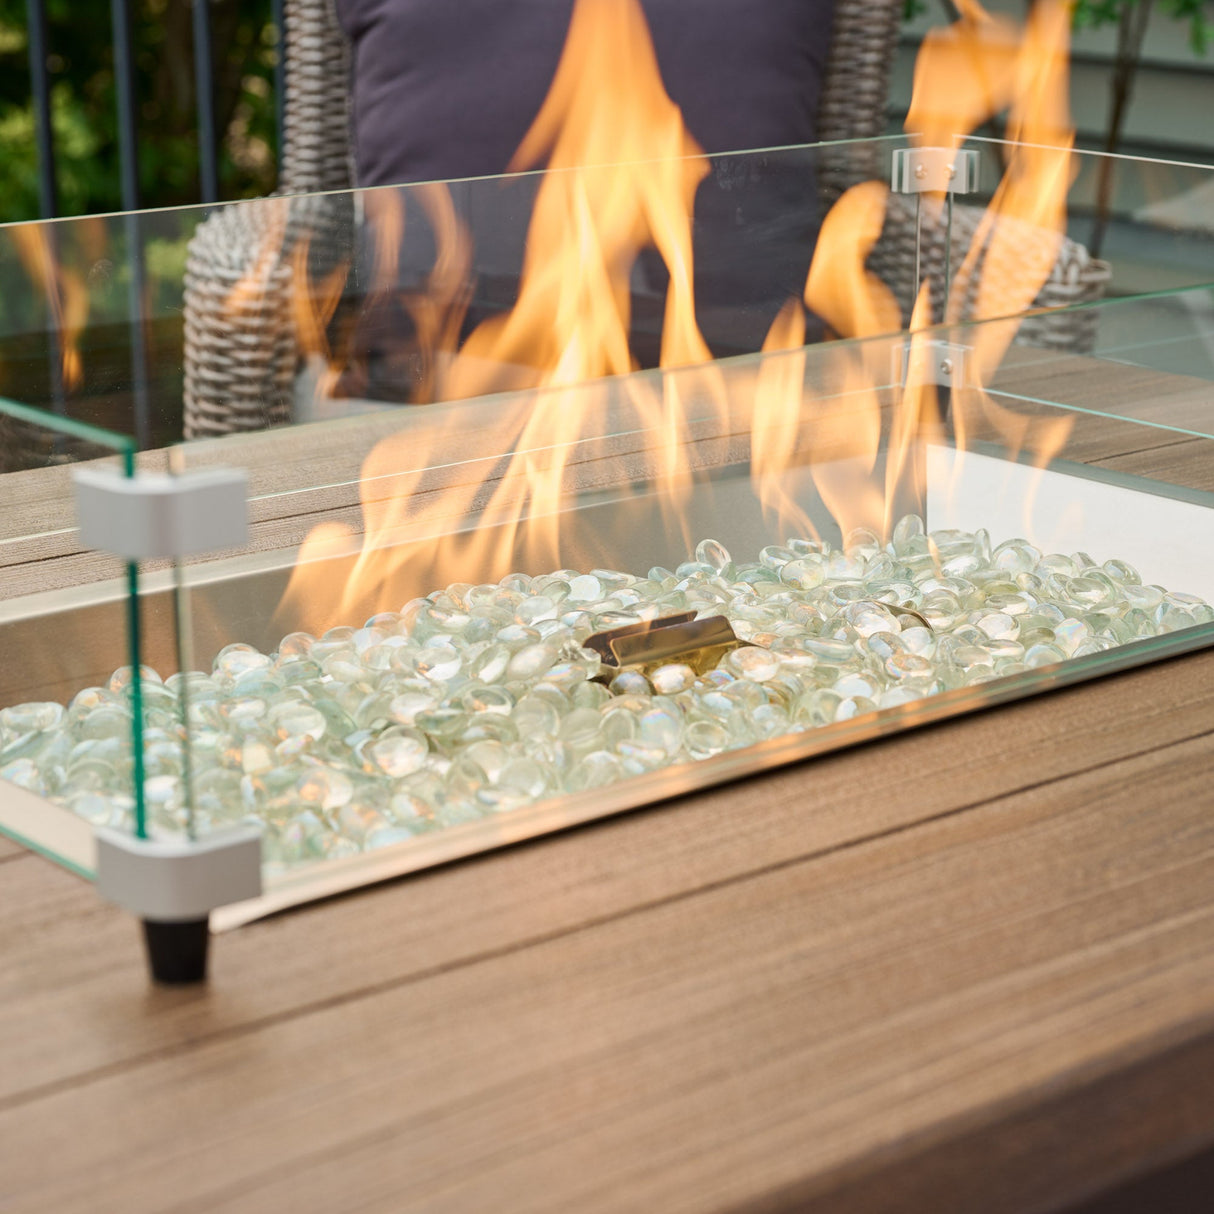 A close up of the flame from the burner of a Havenwood Rectangular Gas Fire Pit Table with a Driftwood top